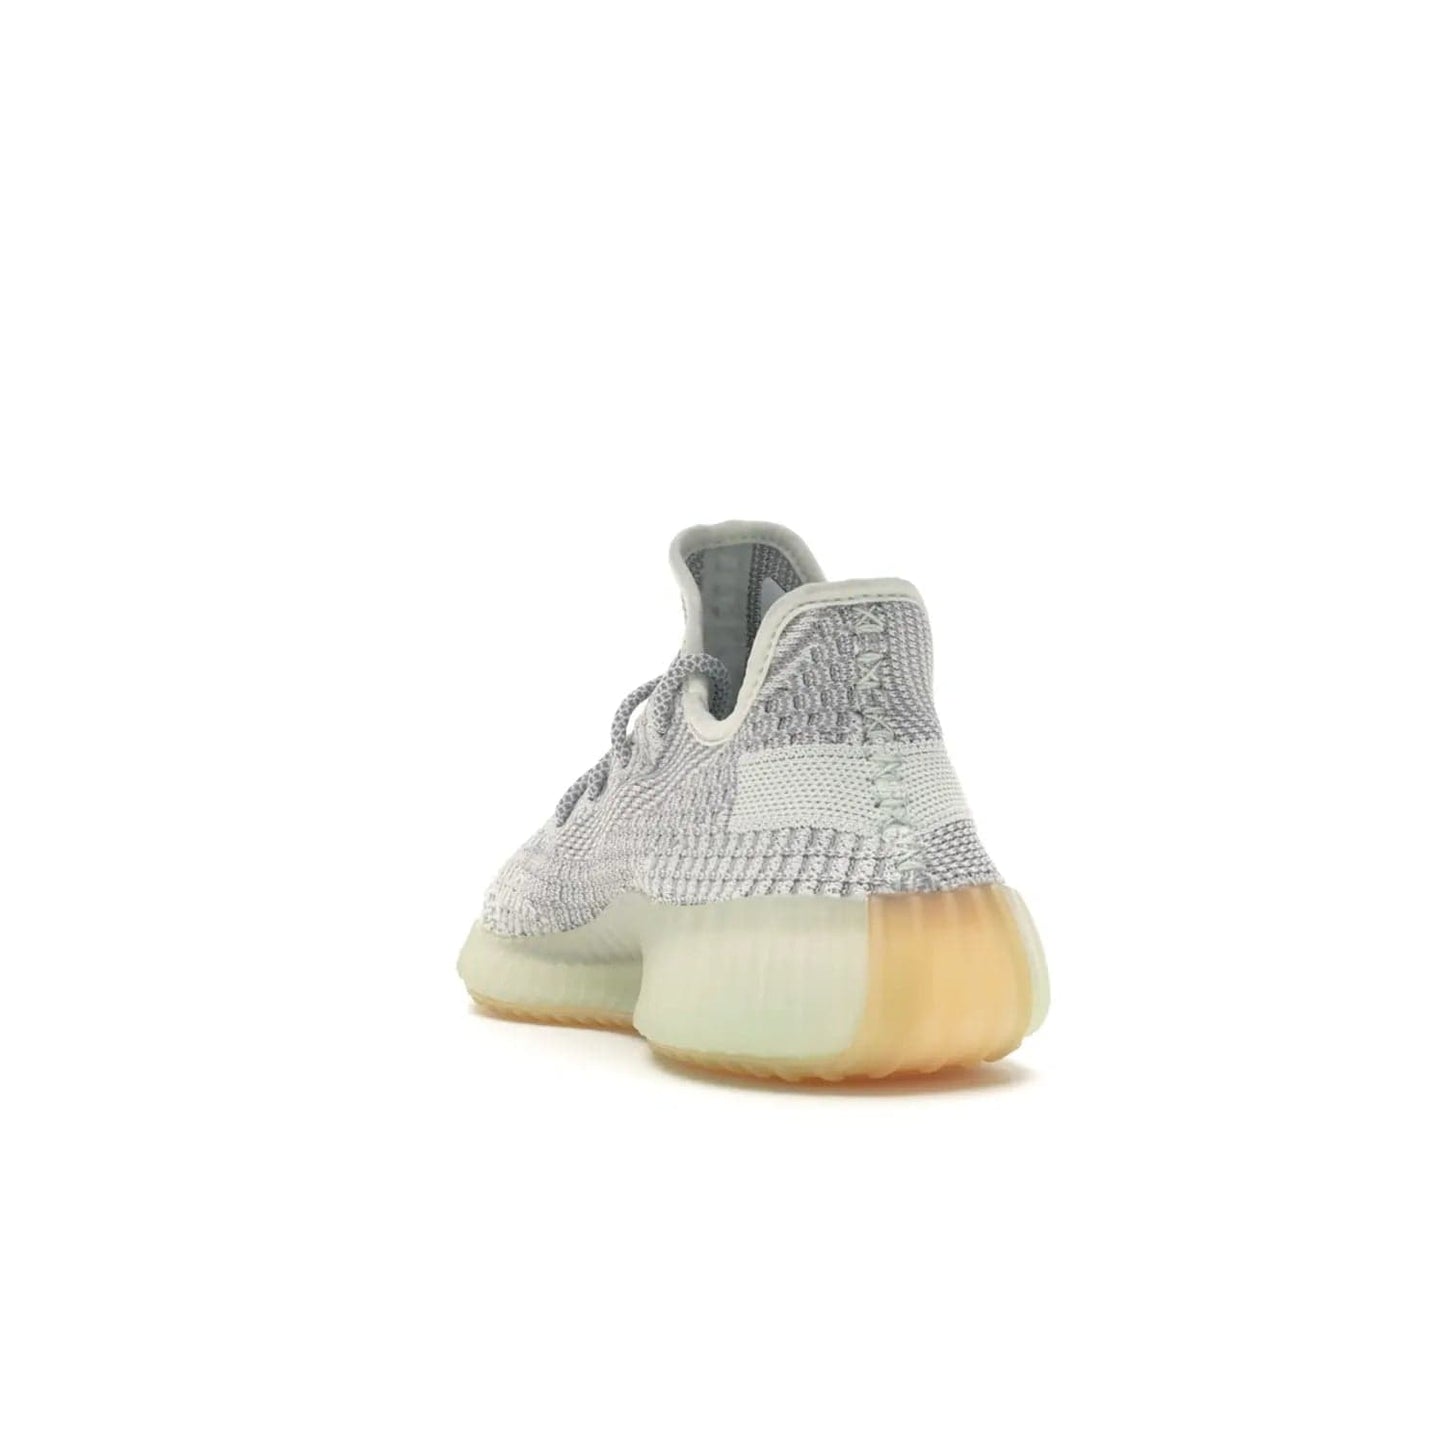 adidas Yeezy Boost 350 V2 Yeshaya (Non-Reflective) - Image 26 - Only at www.BallersClubKickz.com - Step out in style with the adidas Yeezy Boost 350 V2 Yeshaya (Non-Reflective). Gray-and-white Primeknit upper with mesh side stripe & rope laces, plus a translucent Boost sole with a hint of yellow. Make a statement and feel comfortable with this stylish sneaker.